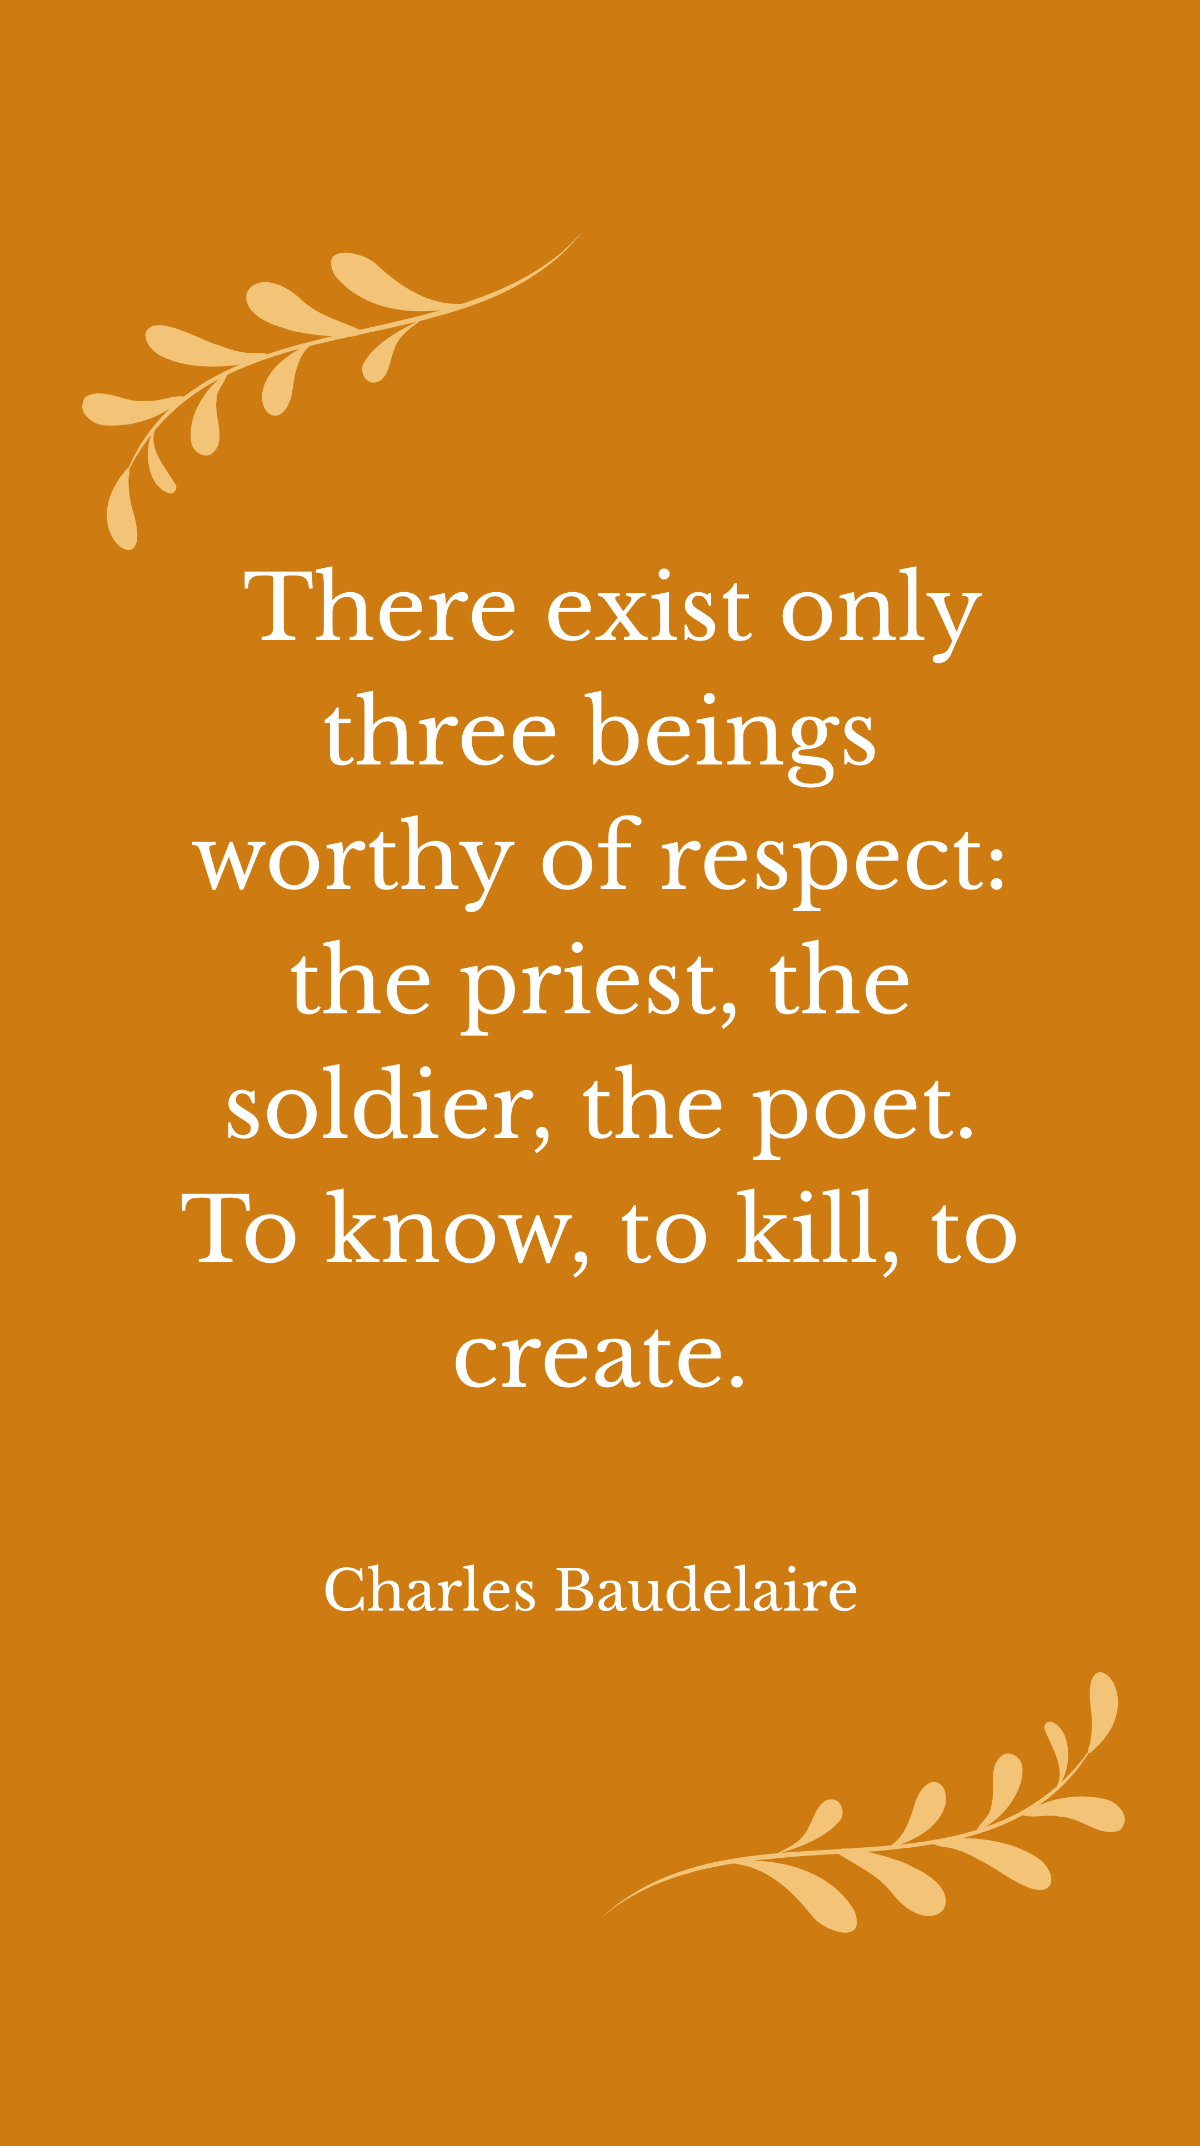 Charles Baudelaire- There exist only three beings worthy of respect: the priest, the soldier, the poet. To know, to kill, to create. Template